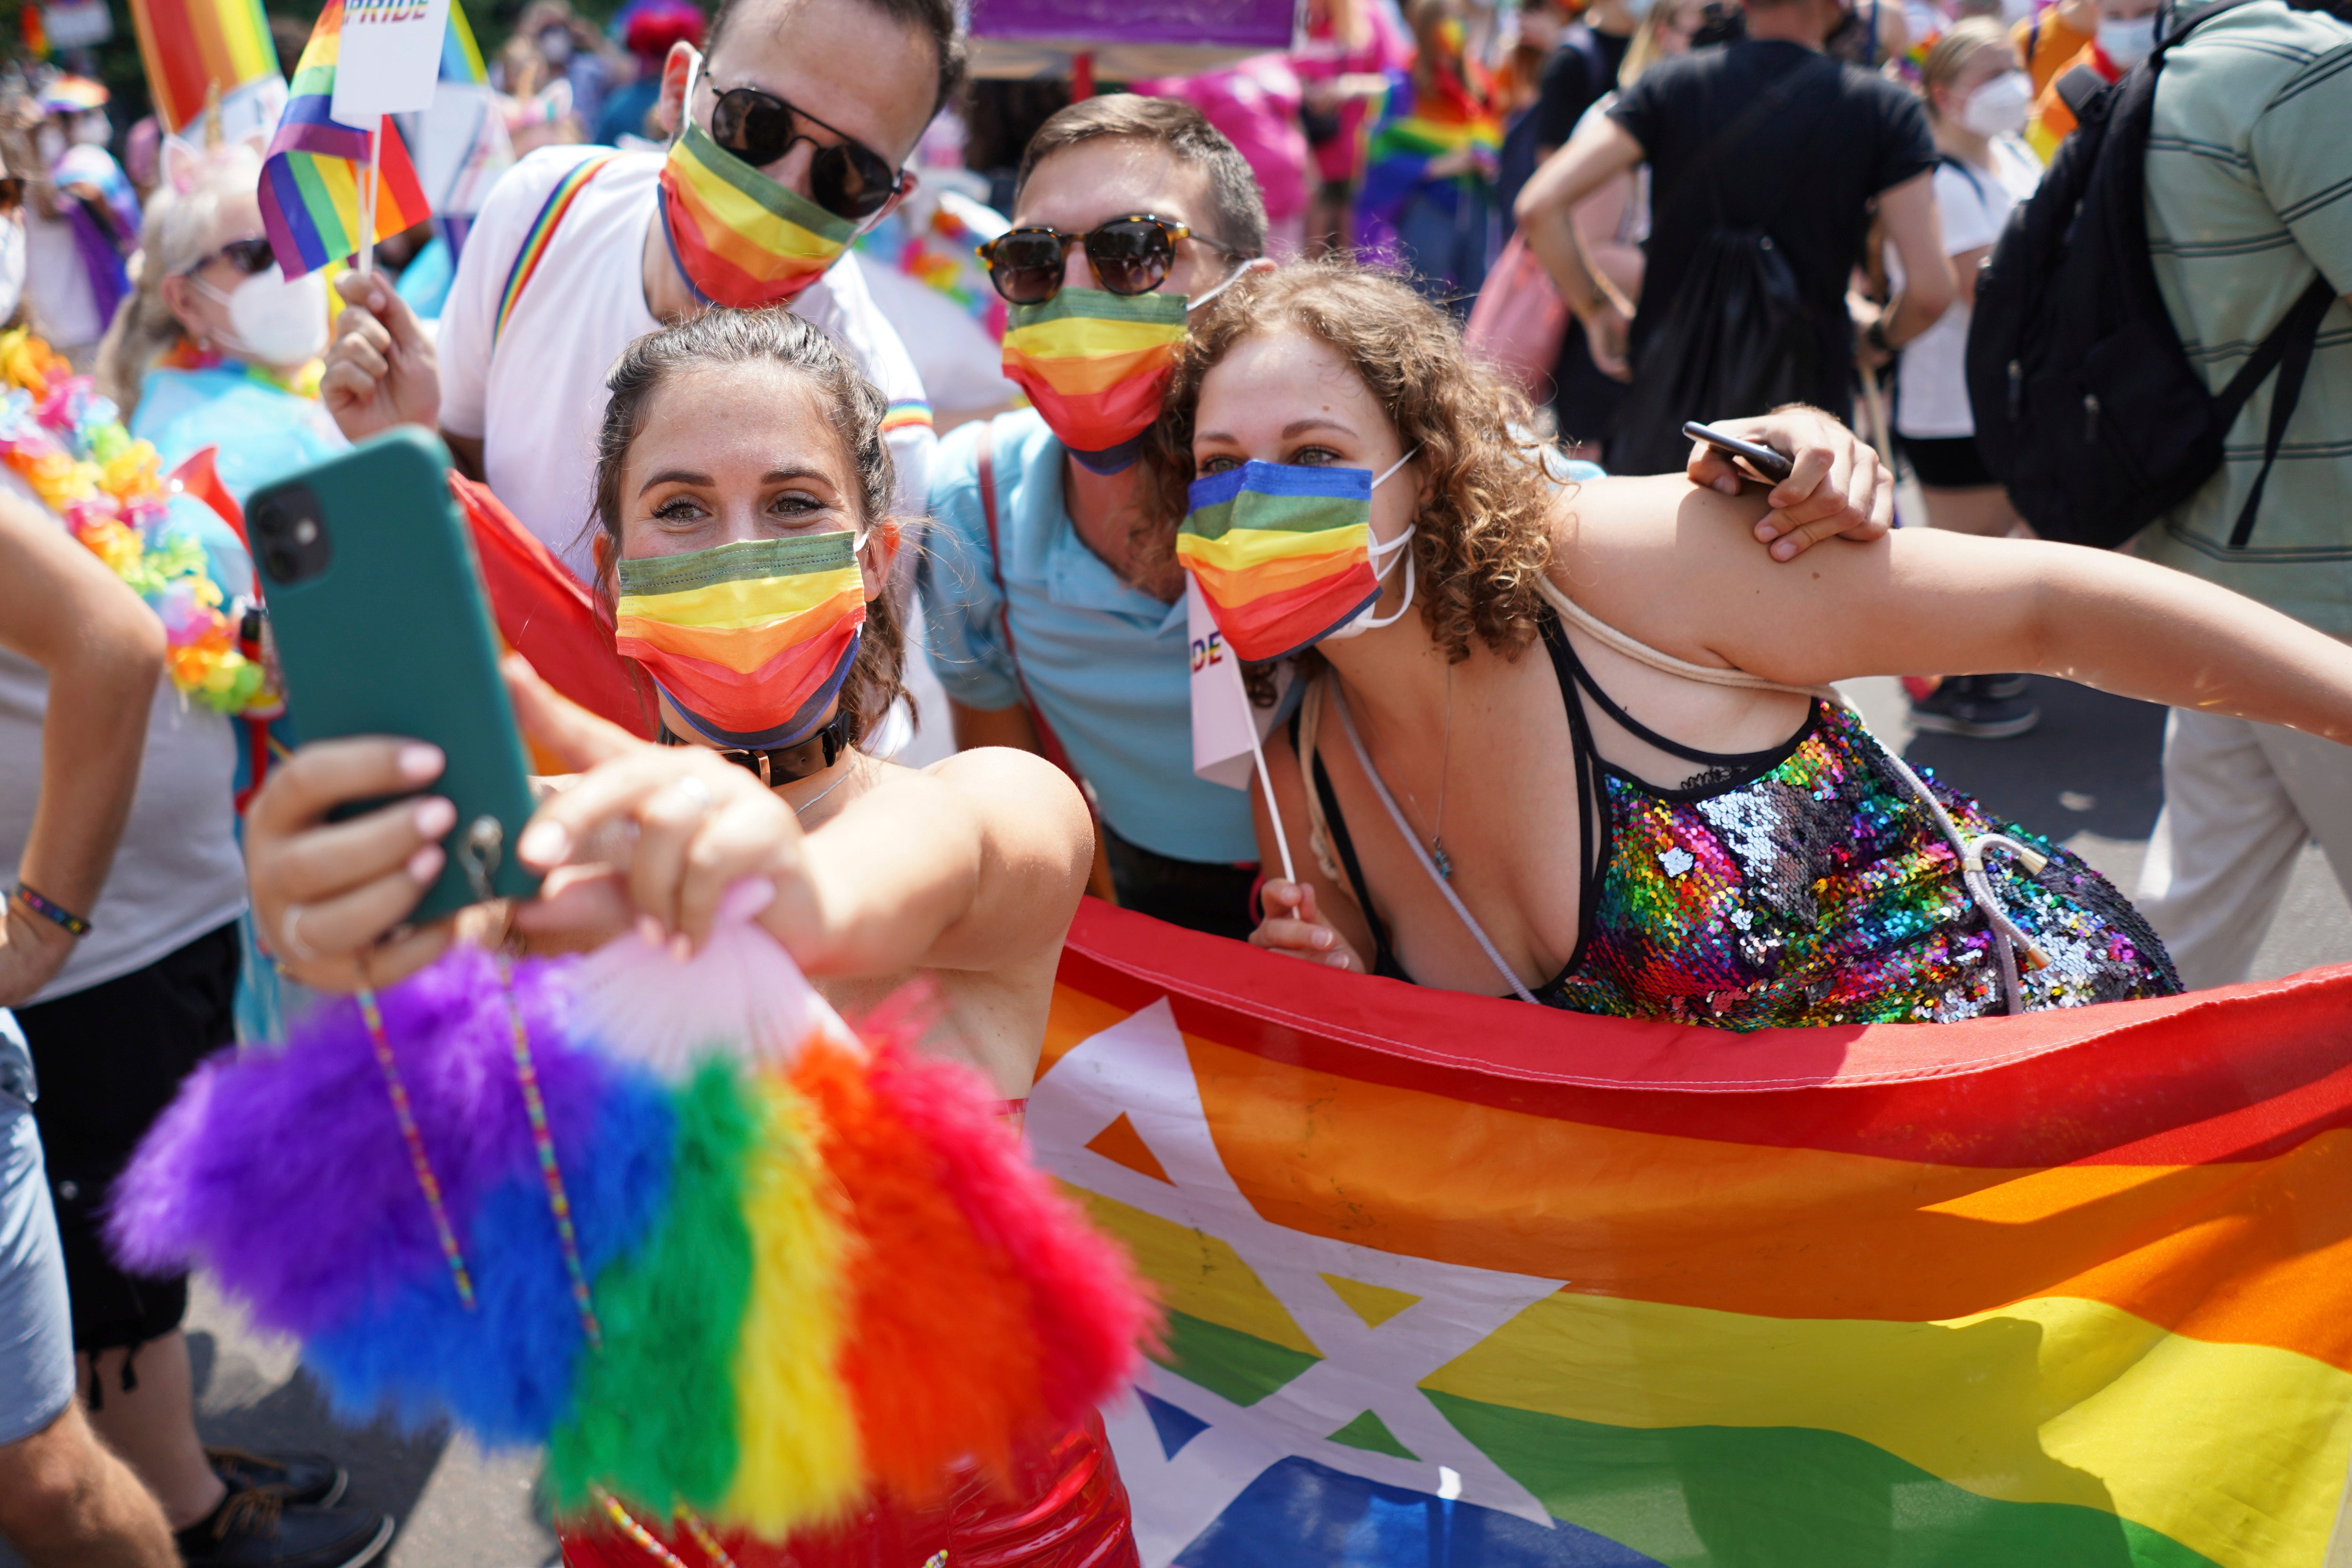 Thousands march and dance for LGBTQ rights at Berlin parade United